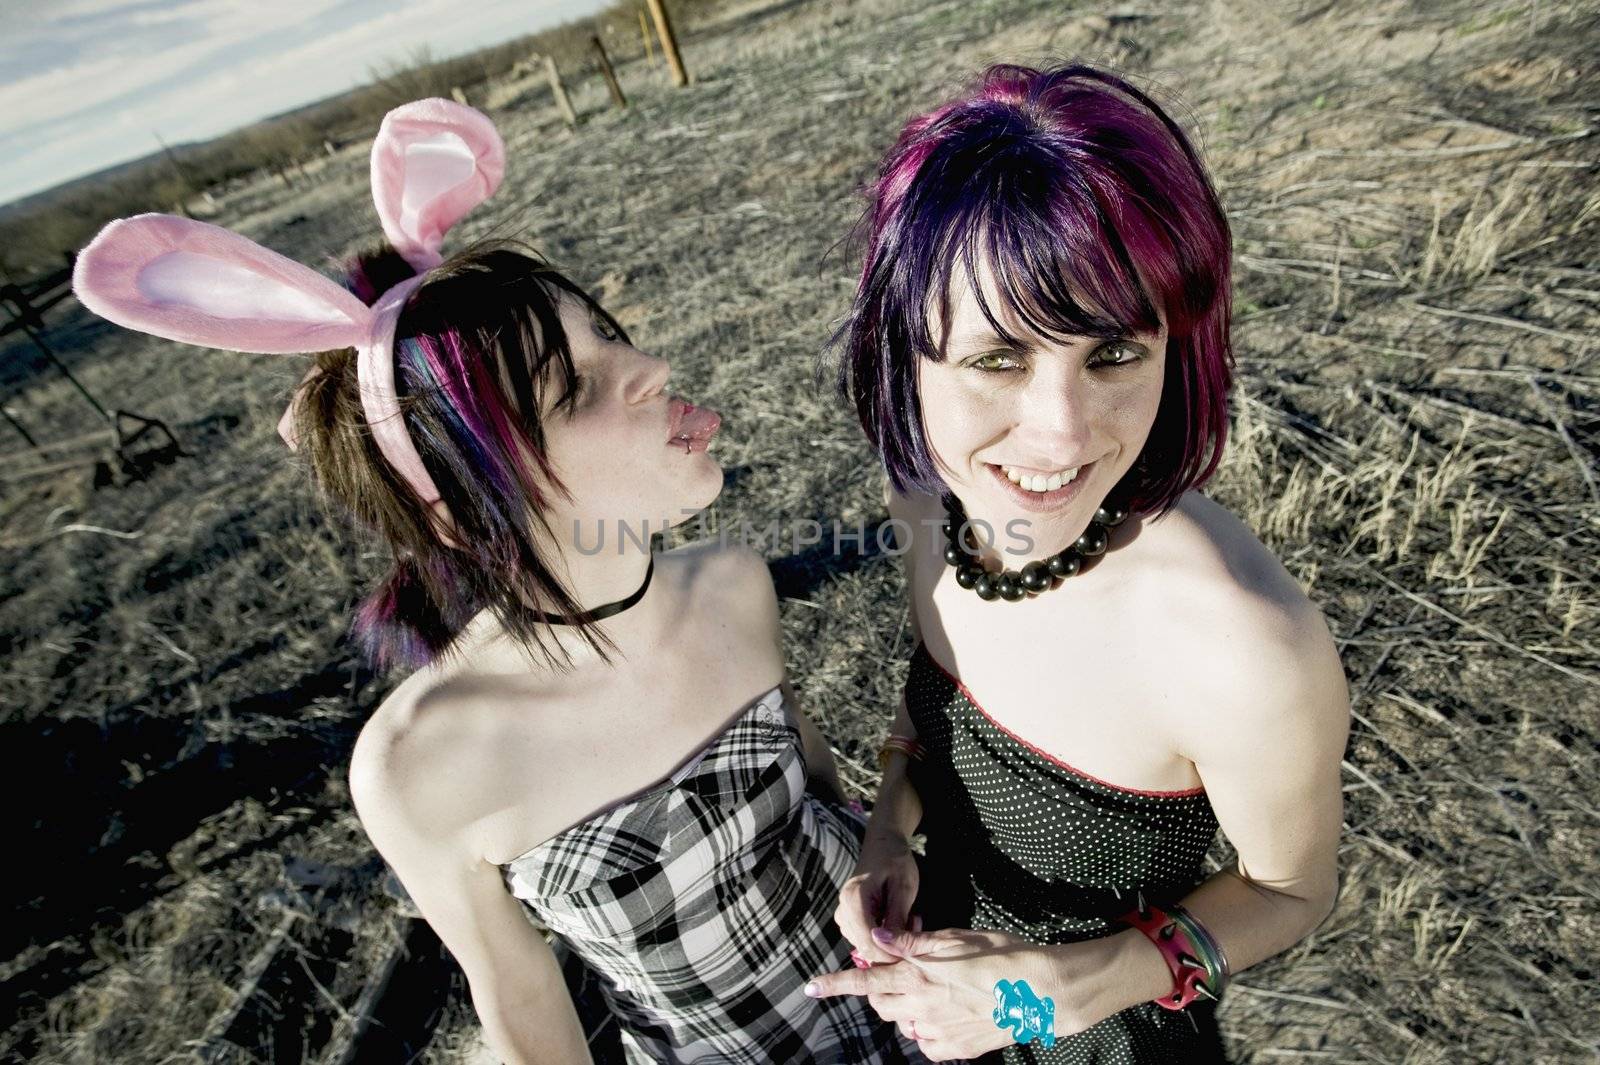 Punk girl sticking her tongue out at her friend